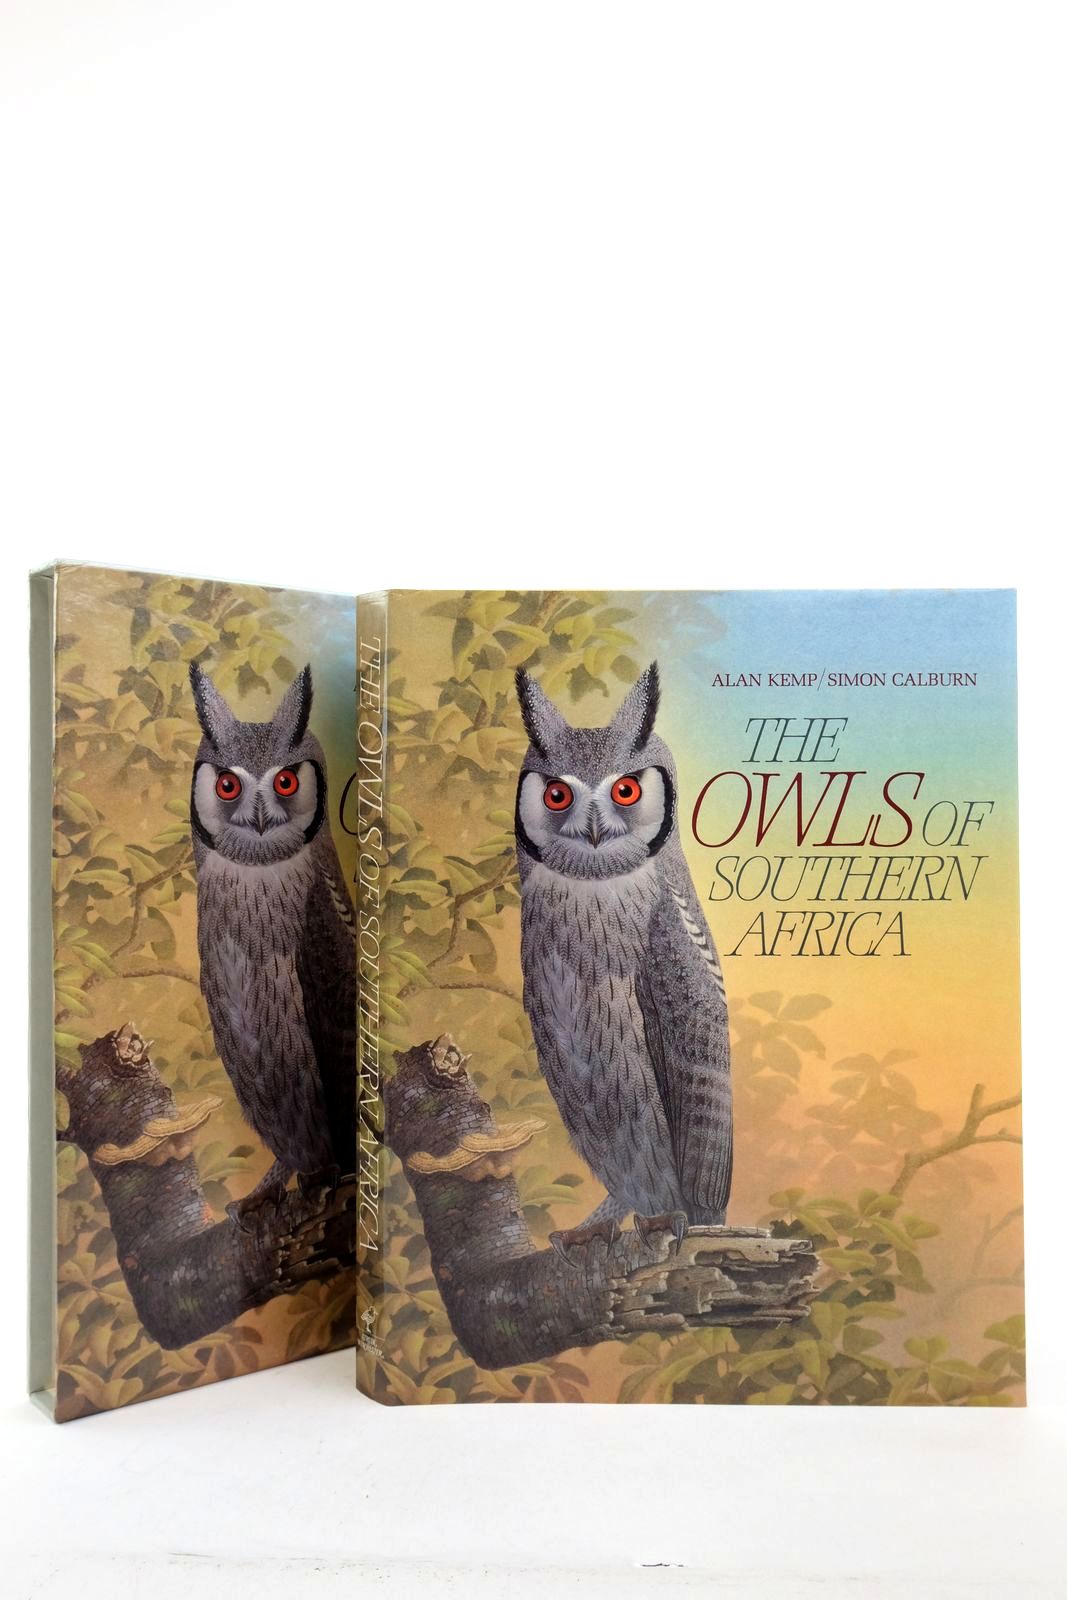 Photo of THE OWLS OF SOUTHERN AFRICA written by Kemp, Alan illustrated by Calburn, Simon published by Struik (STOCK CODE: 2139838)  for sale by Stella & Rose's Books